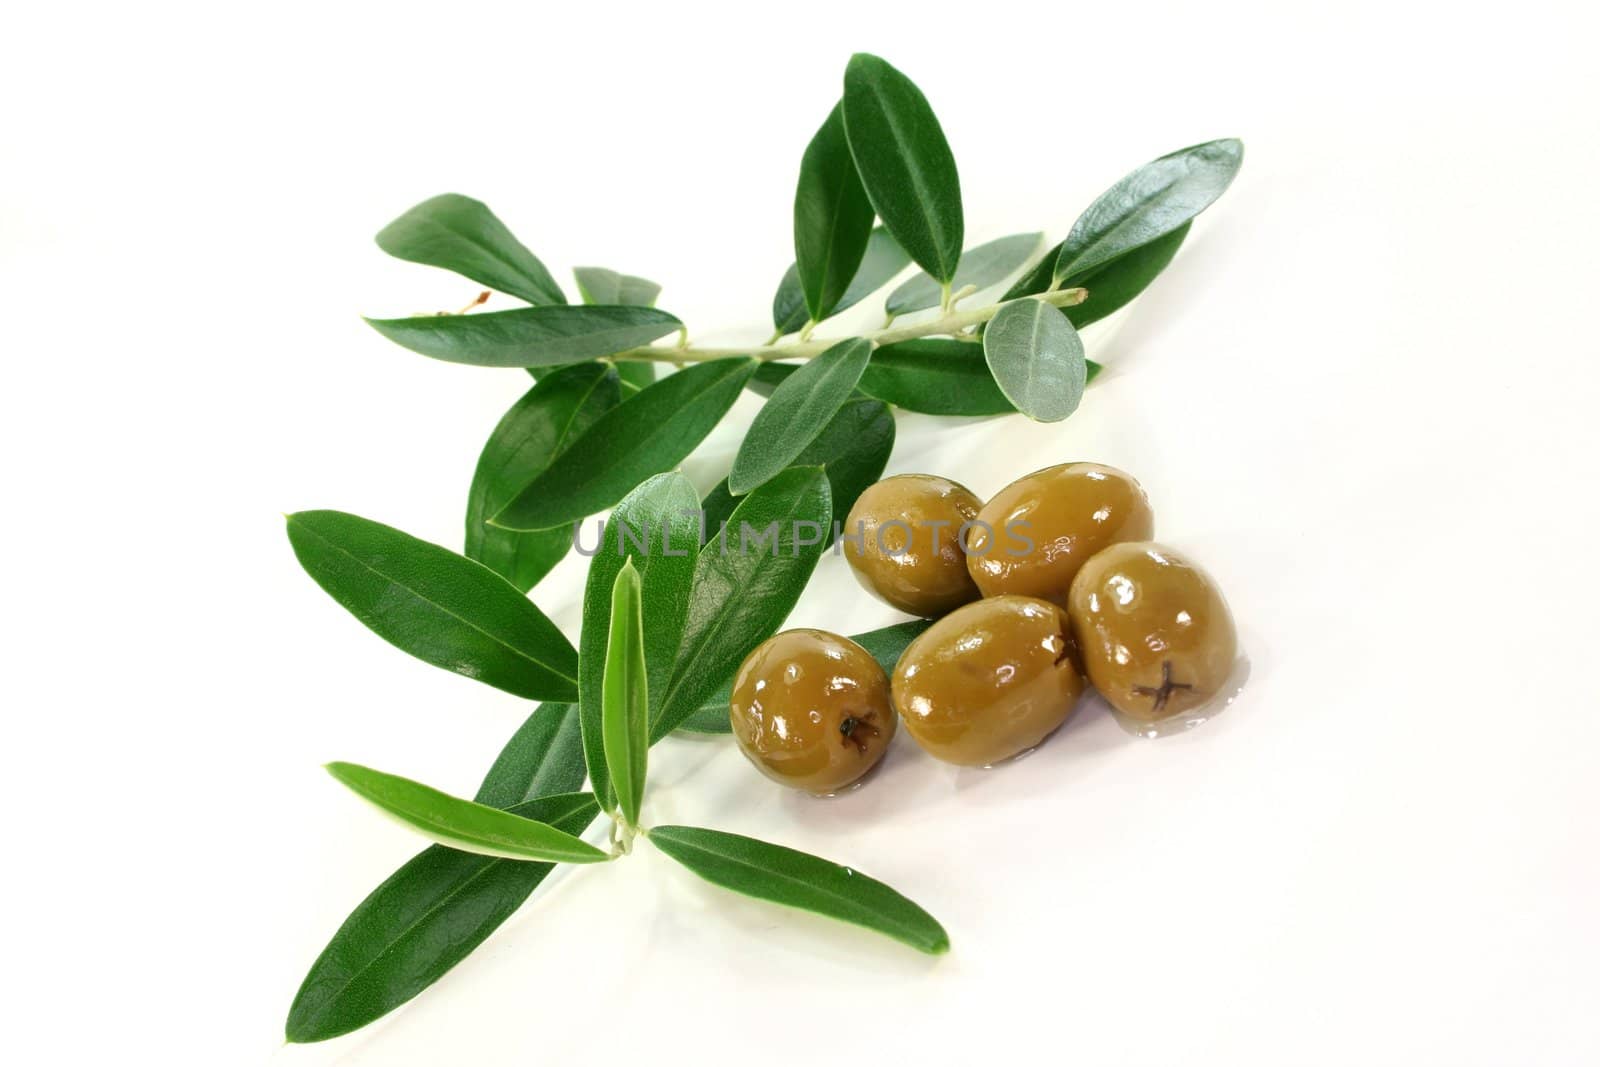 Olives and olive branch on a white background
